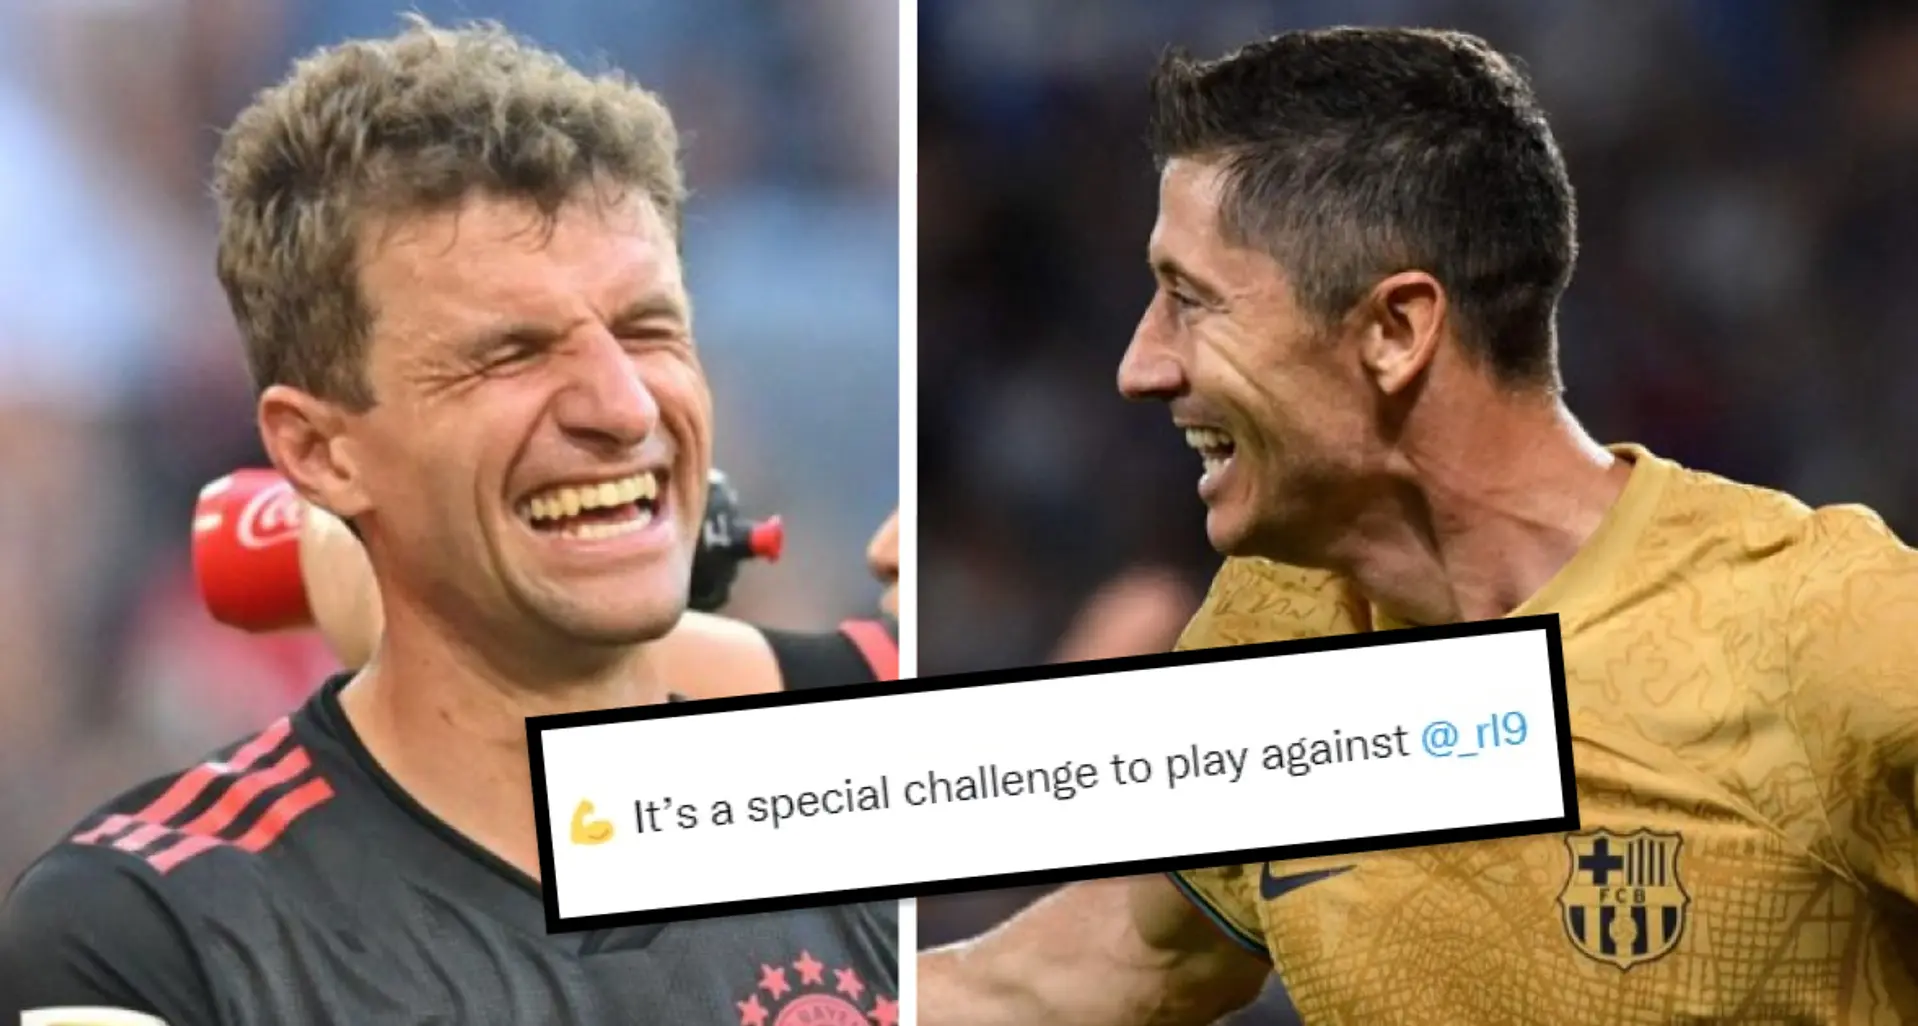 'What a nice draw': Muller reacts to Bayern drawing Barca, sends special message to Lewandowski